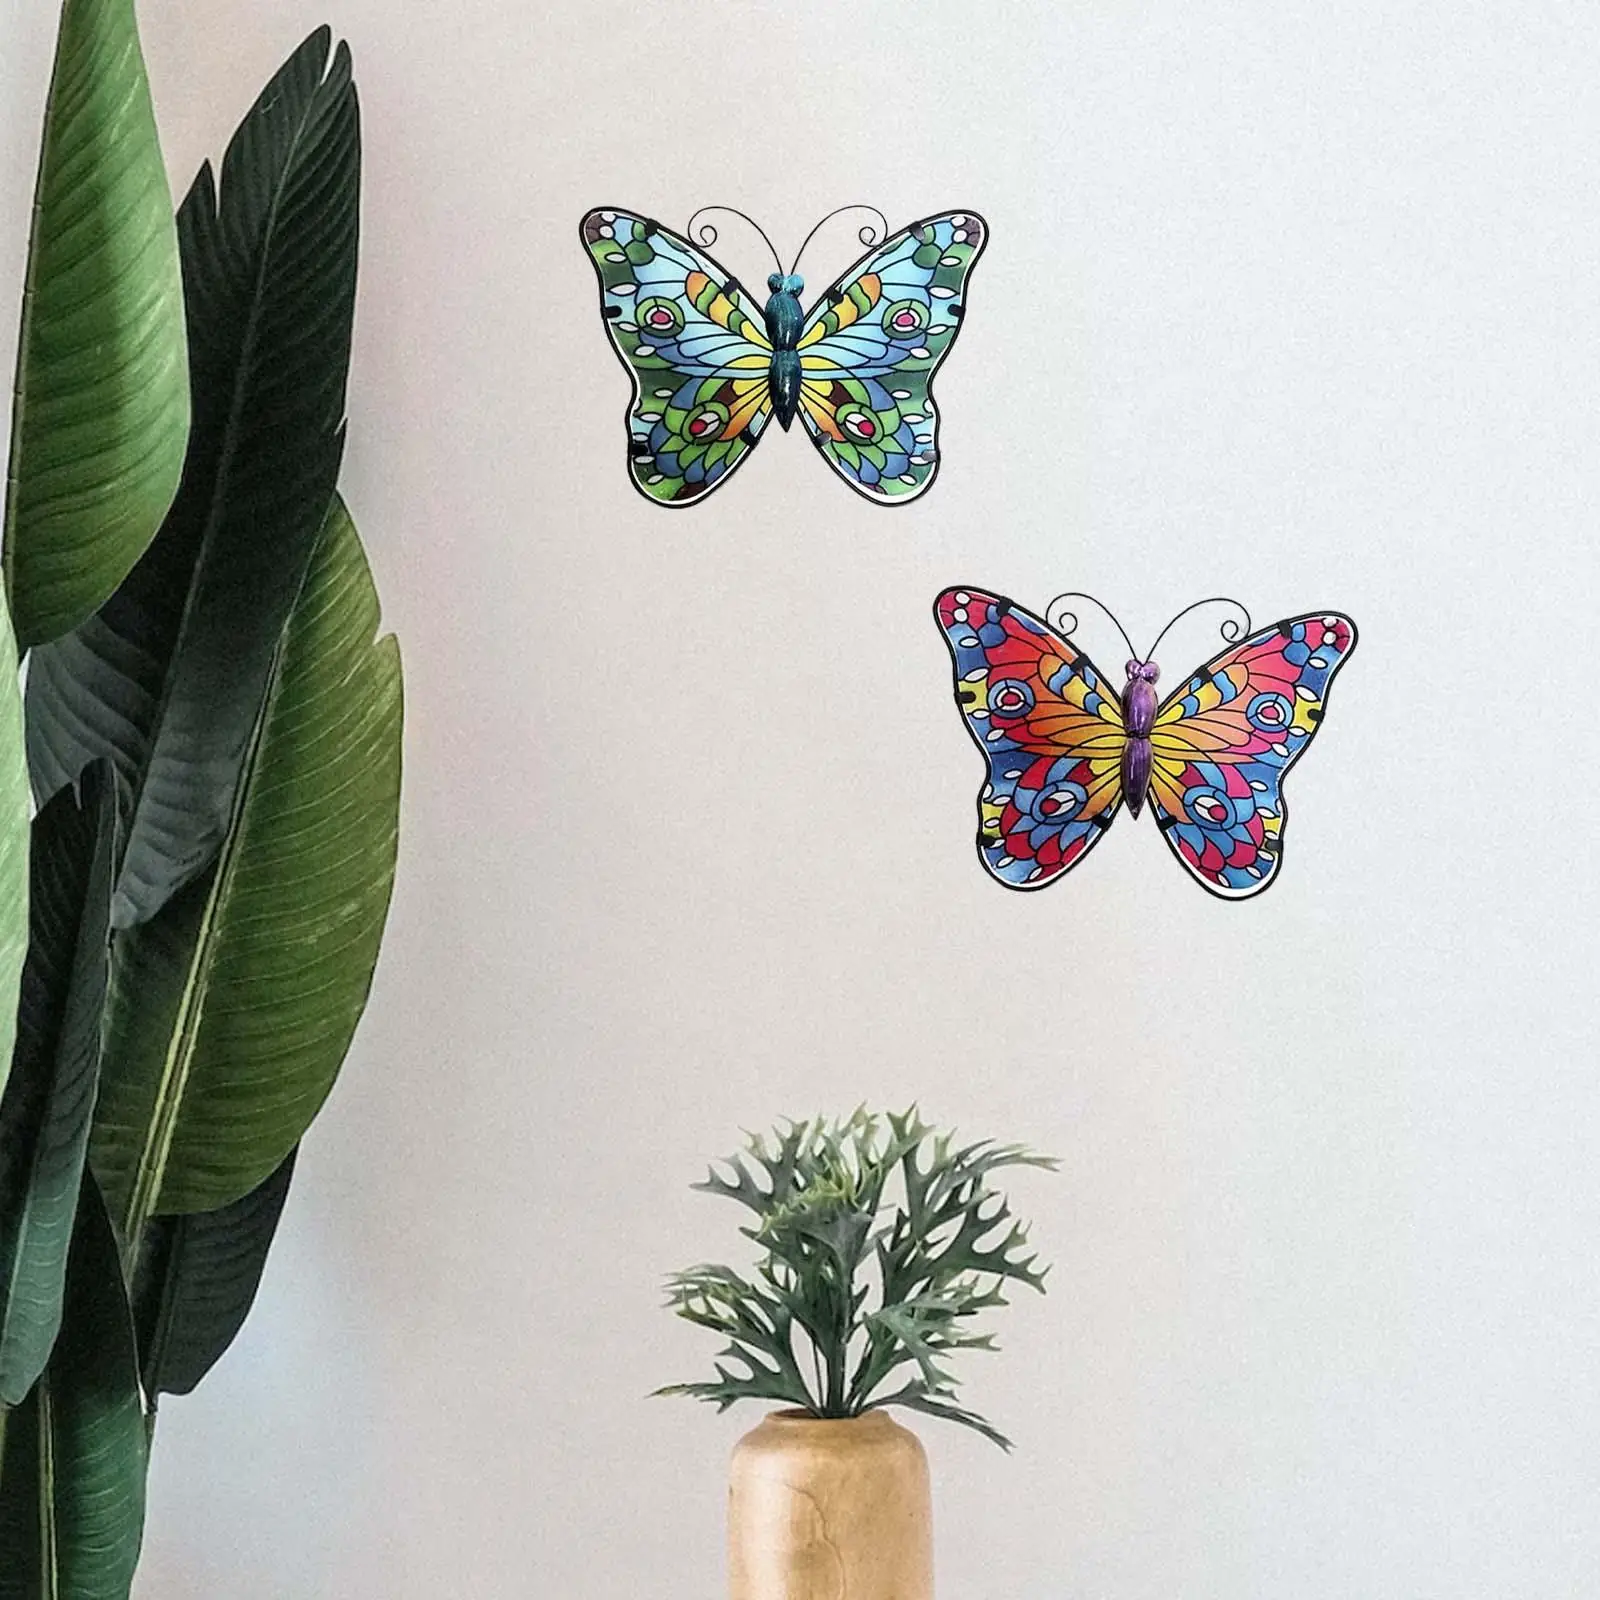 2x 3D Butterfly Ornaments Statue Wall Decor Plaque Ornament Metal Hanging for Gift Wall Art Outdoor Backyard Office